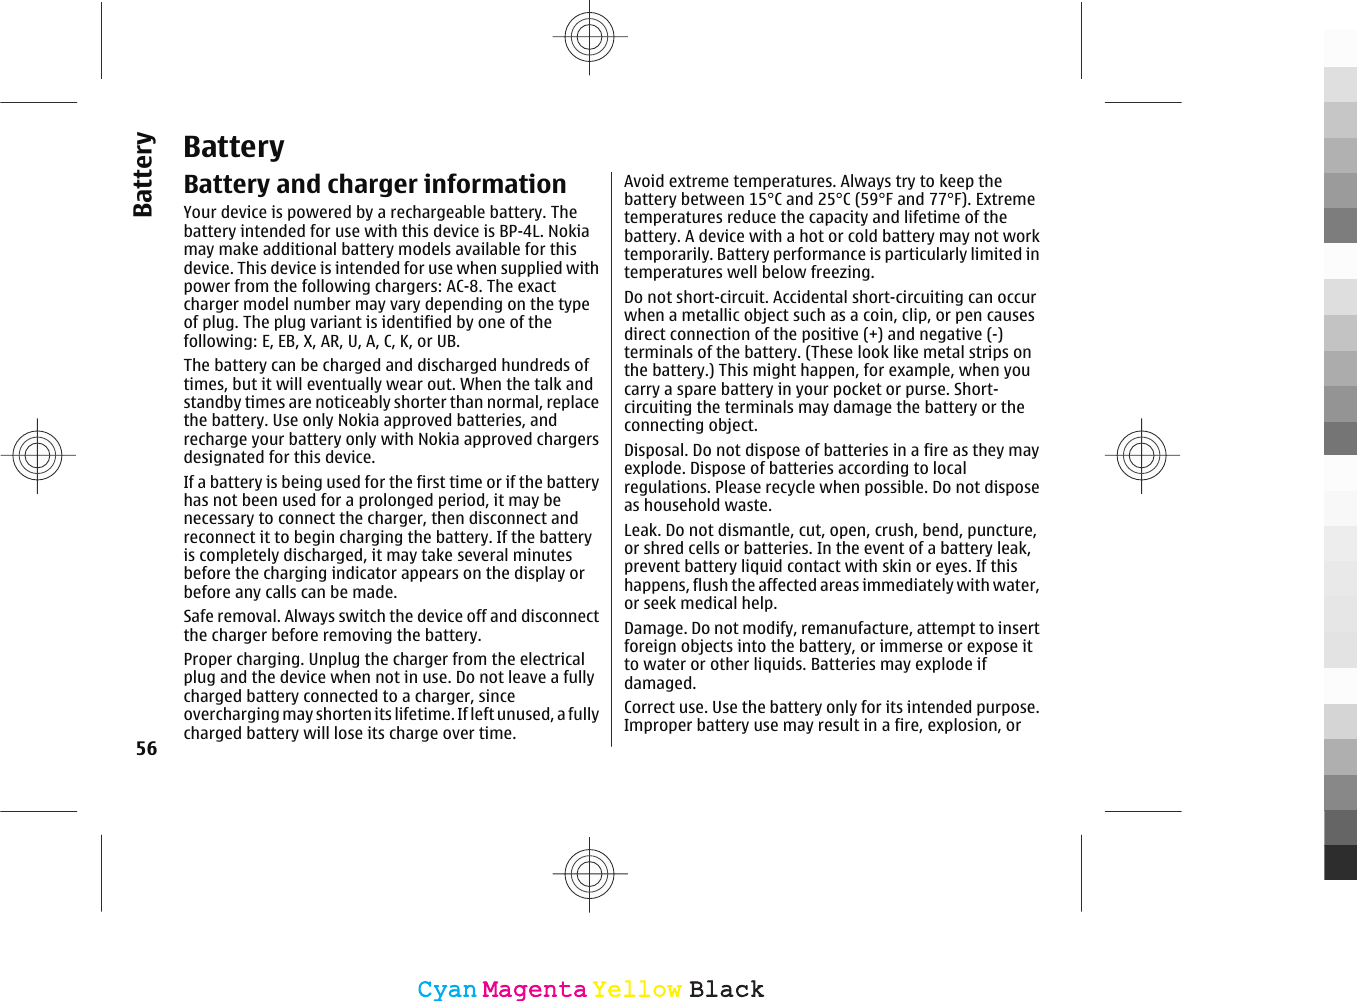 BatteryBattery and charger informationYour device is powered by a rechargeable battery. Thebattery intended for use with this device is BP-4L. Nokiamay make additional battery models available for thisdevice. This device is intended for use when supplied withpower from the following chargers: AC-8. The exactcharger model number may vary depending on the typeof plug. The plug variant is identified by one of thefollowing: E, EB, X, AR, U, A, C, K, or UB.The battery can be charged and discharged hundreds oftimes, but it will eventually wear out. When the talk andstandby times are noticeably shorter than normal, replacethe battery. Use only Nokia approved batteries, andrecharge your battery only with Nokia approved chargersdesignated for this device.If a battery is being used for the first time or if the batteryhas not been used for a prolonged period, it may benecessary to connect the charger, then disconnect andreconnect it to begin charging the battery. If the batteryis completely discharged, it may take several minutesbefore the charging indicator appears on the display orbefore any calls can be made.Safe removal. Always switch the device off and disconnectthe charger before removing the battery.Proper charging. Unplug the charger from the electricalplug and the device when not in use. Do not leave a fullycharged battery connected to a charger, sinceovercharging may shorten its lifetime. If left unused, a fullycharged battery will lose its charge over time.Avoid extreme temperatures. Always try to keep thebattery between 15°C and 25°C (59°F and 77°F). Extremetemperatures reduce the capacity and lifetime of thebattery. A device with a hot or cold battery may not worktemporarily. Battery performance is particularly limited intemperatures well below freezing.Do not short-circuit. Accidental short-circuiting can occurwhen a metallic object such as a coin, clip, or pen causesdirect connection of the positive (+) and negative (-)terminals of the battery. (These look like metal strips onthe battery.) This might happen, for example, when youcarry a spare battery in your pocket or purse. Short-circuiting the terminals may damage the battery or theconnecting object.Disposal. Do not dispose of batteries in a fire as they mayexplode. Dispose of batteries according to localregulations. Please recycle when possible. Do not disposeas household waste.Leak. Do not dismantle, cut, open, crush, bend, puncture,or shred cells or batteries. In the event of a battery leak,prevent battery liquid contact with skin or eyes. If thishappens, flush the affected areas immediately with water,or seek medical help.Damage. Do not modify, remanufacture, attempt to insertforeign objects into the battery, or immerse or expose itto water or other liquids. Batteries may explode ifdamaged.Correct use. Use the battery only for its intended purpose.Improper battery use may result in a fire, explosion, or56BatteryCyanCyanMagentaMagentaYellowYellowBlackBlack